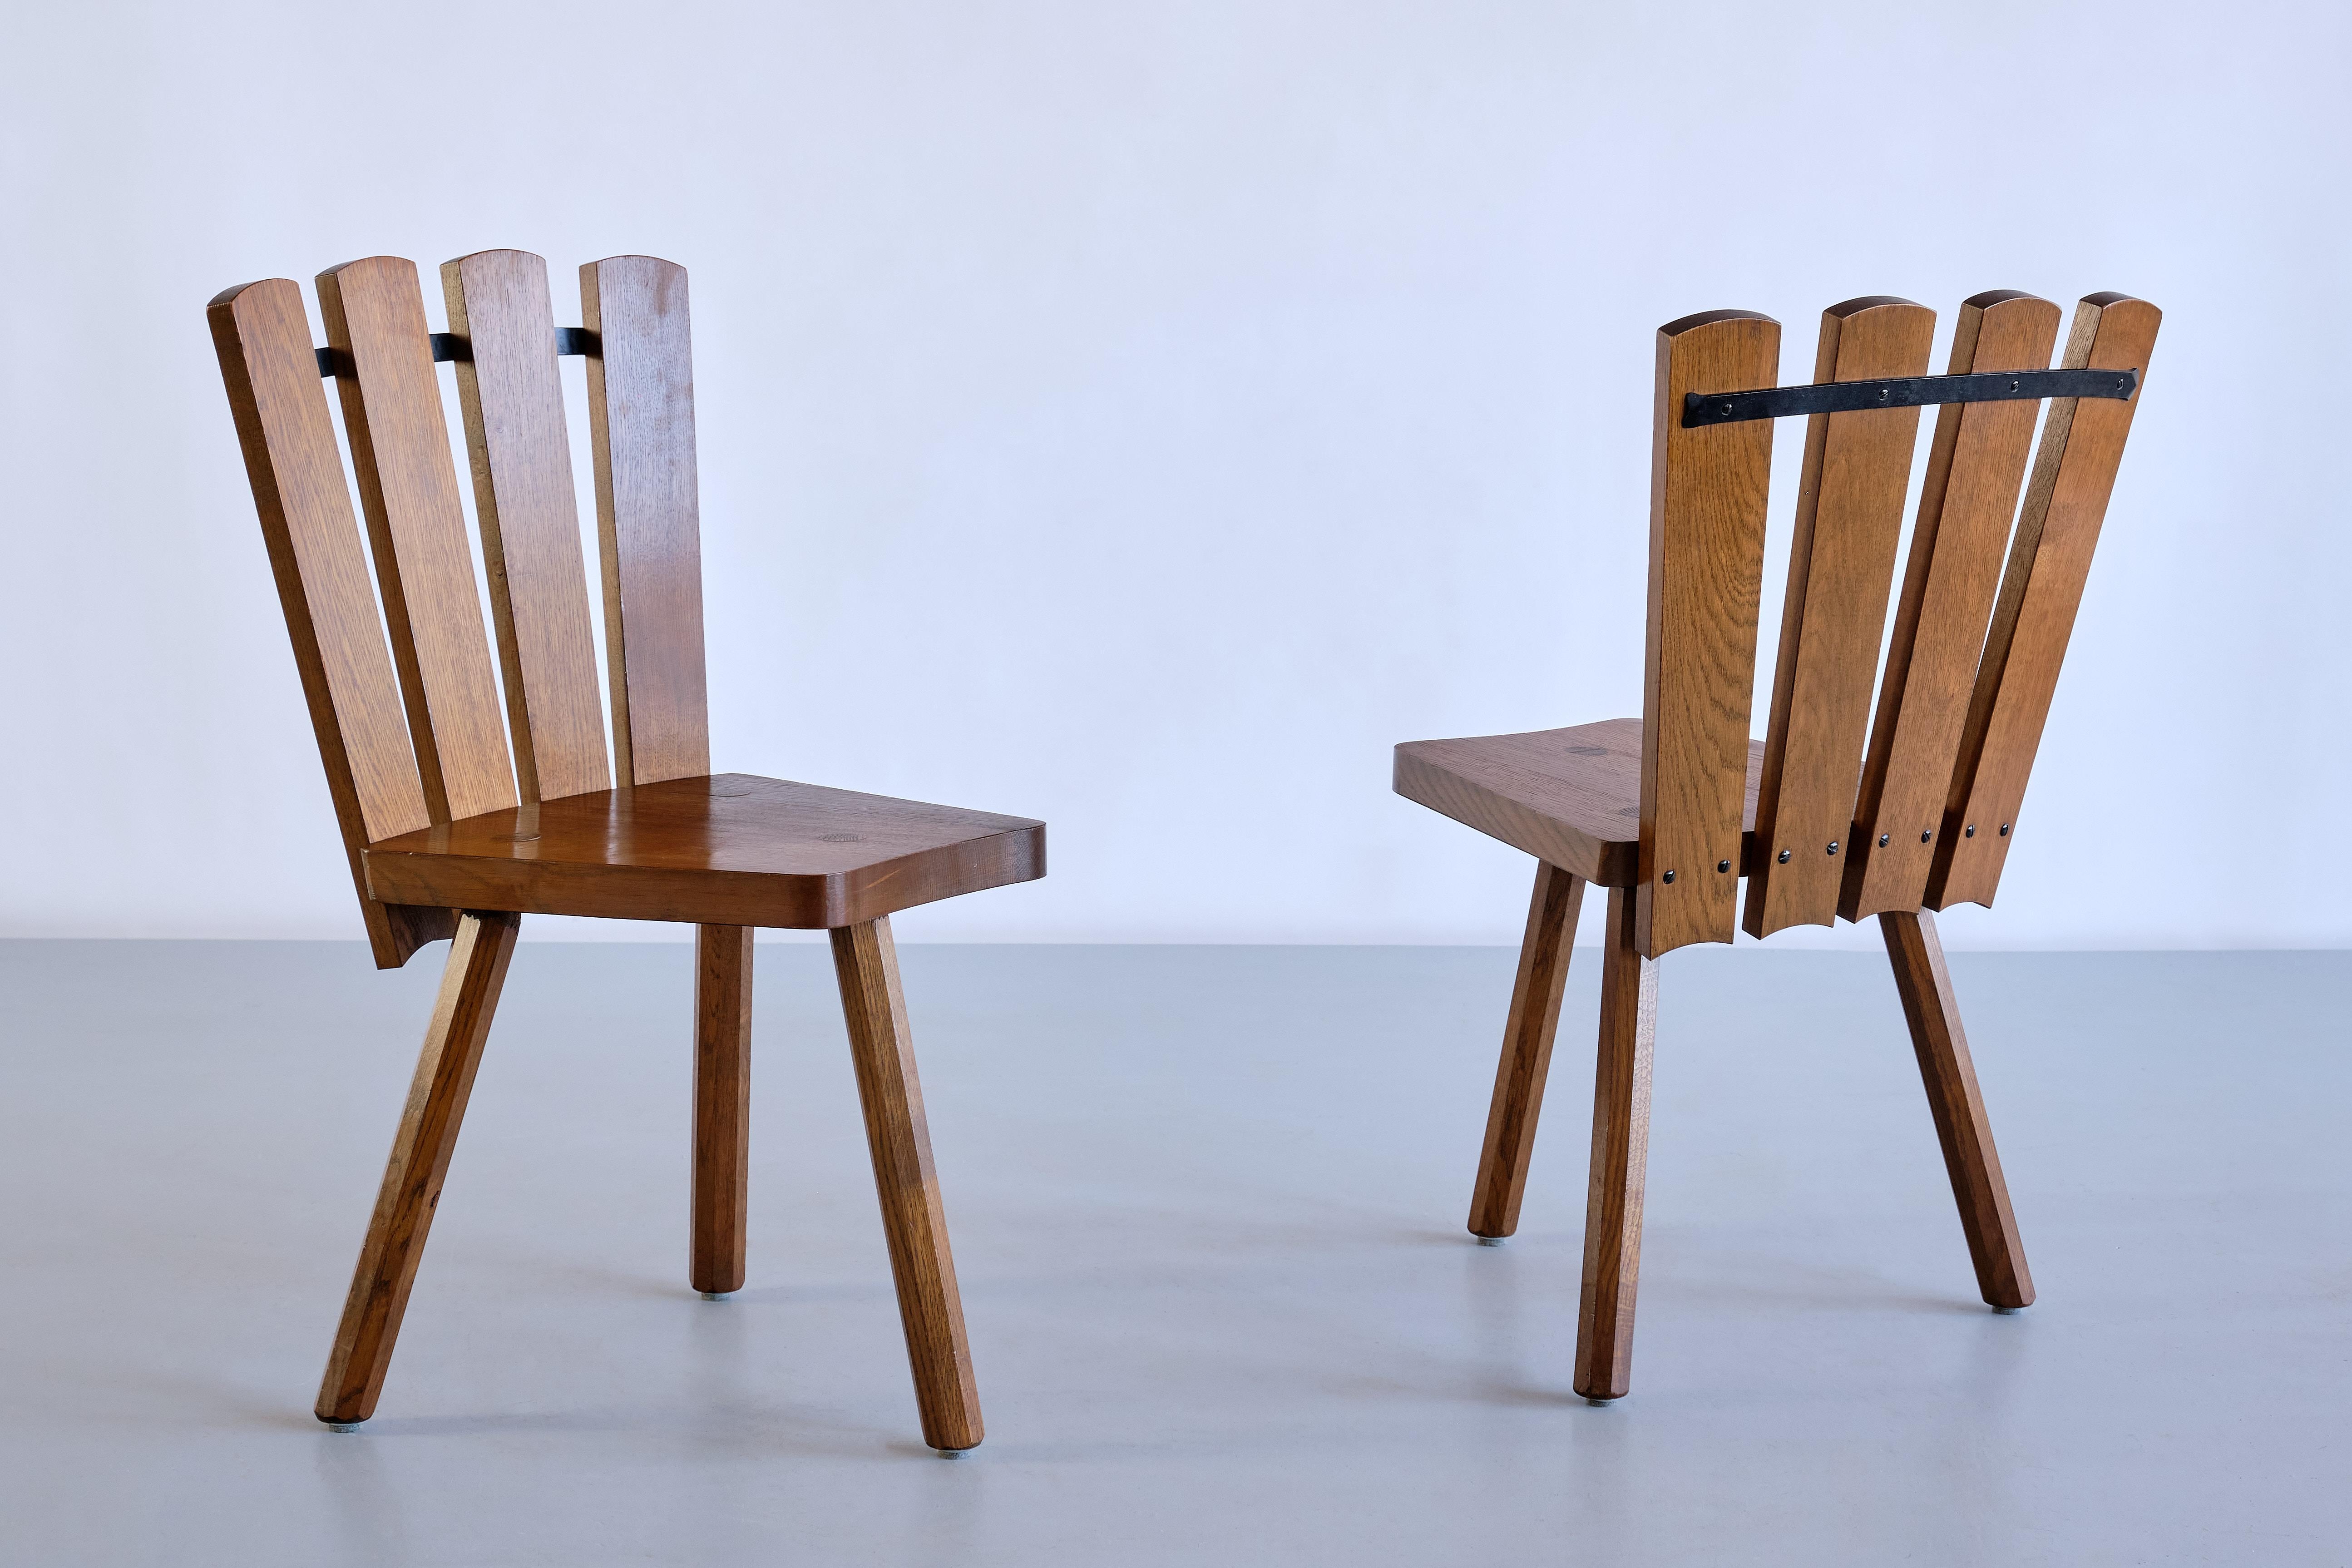 Set of Four French Modern Tripod Oak Dining Chairs with Fan Shaped Back, 1950s For Sale 1